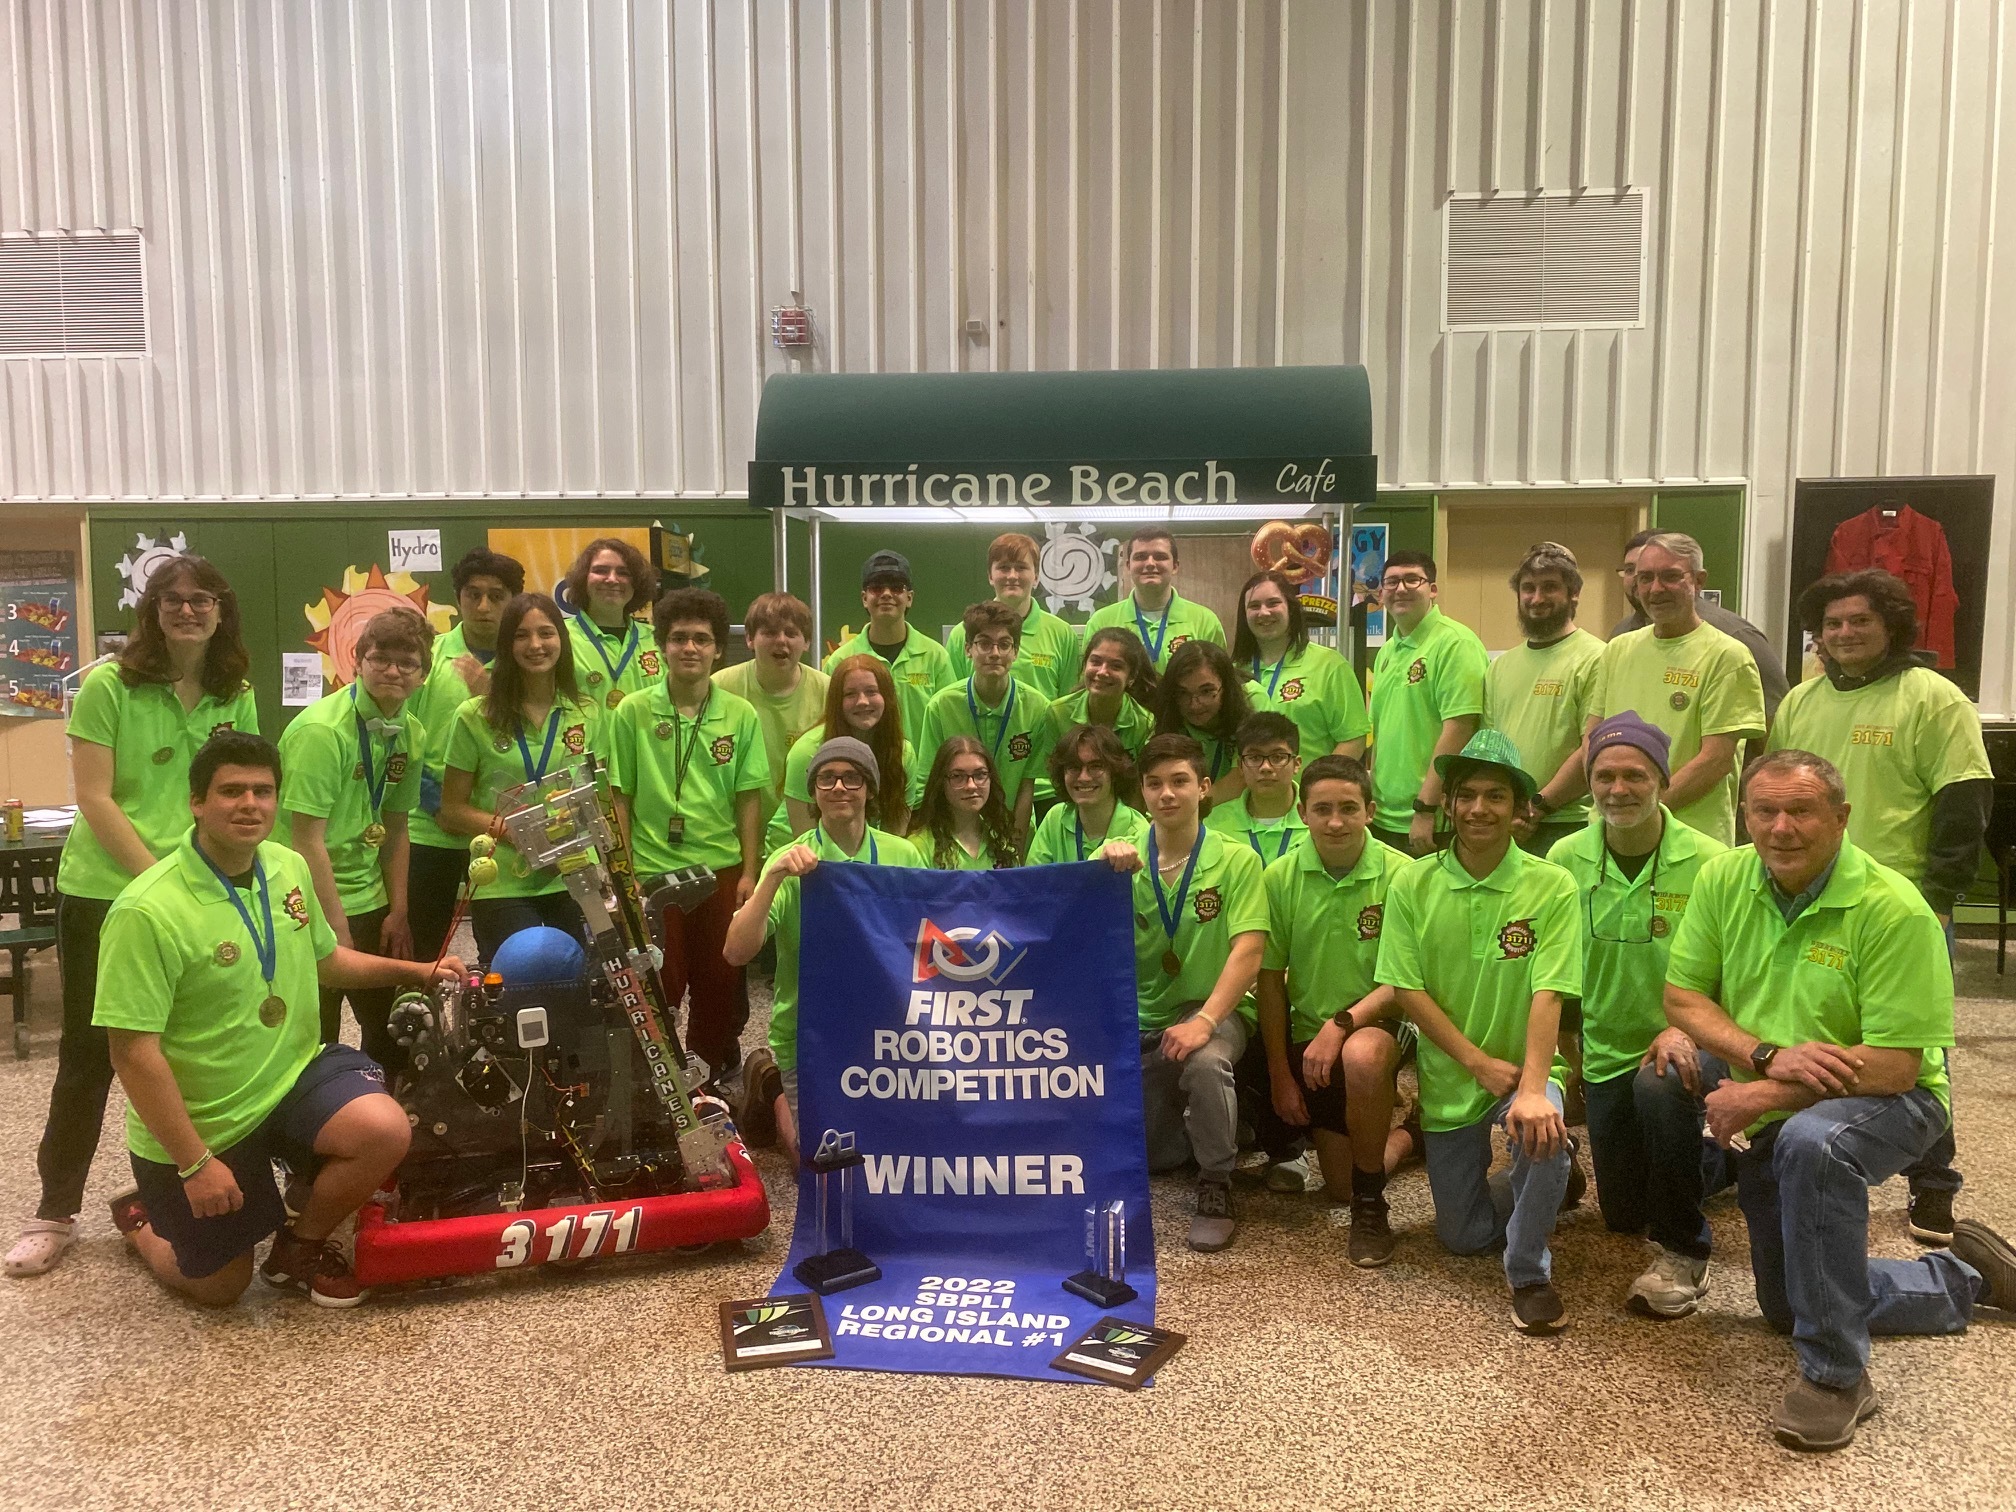 Following two successful competitions, the Westhampton Beach robotics team secured a spot in the FIRST Robotics World Championship held in Houston, Texas. WESTHAMPTON BEACH SCHOOL DISTRICT